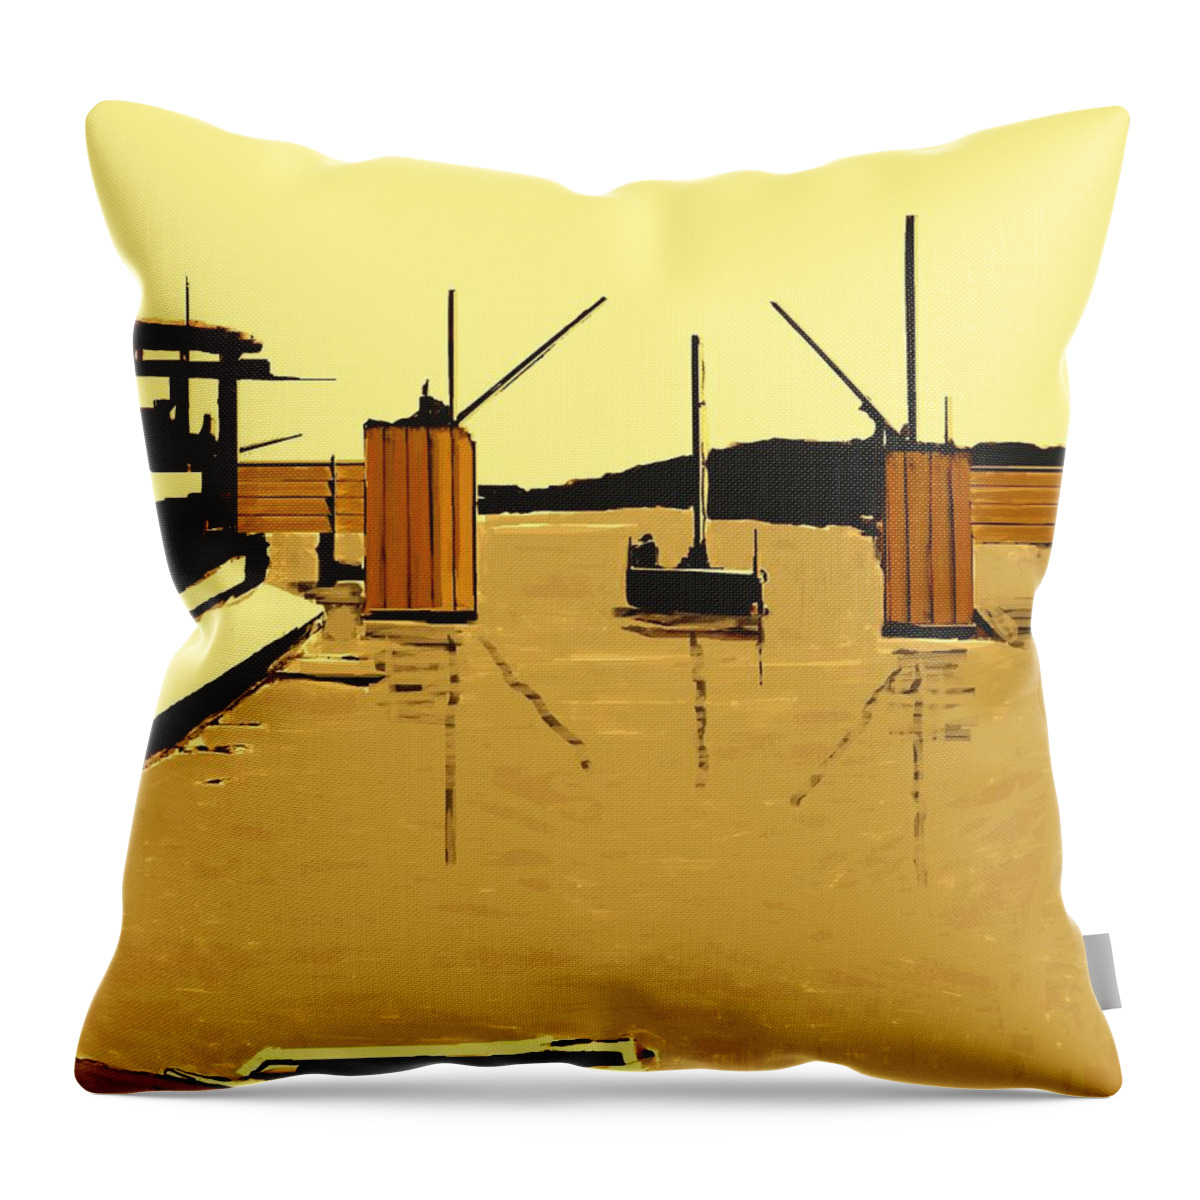 Fineartamerica.com Throw Pillow featuring the painting The Drawbridge Number 18 by Diane Strain